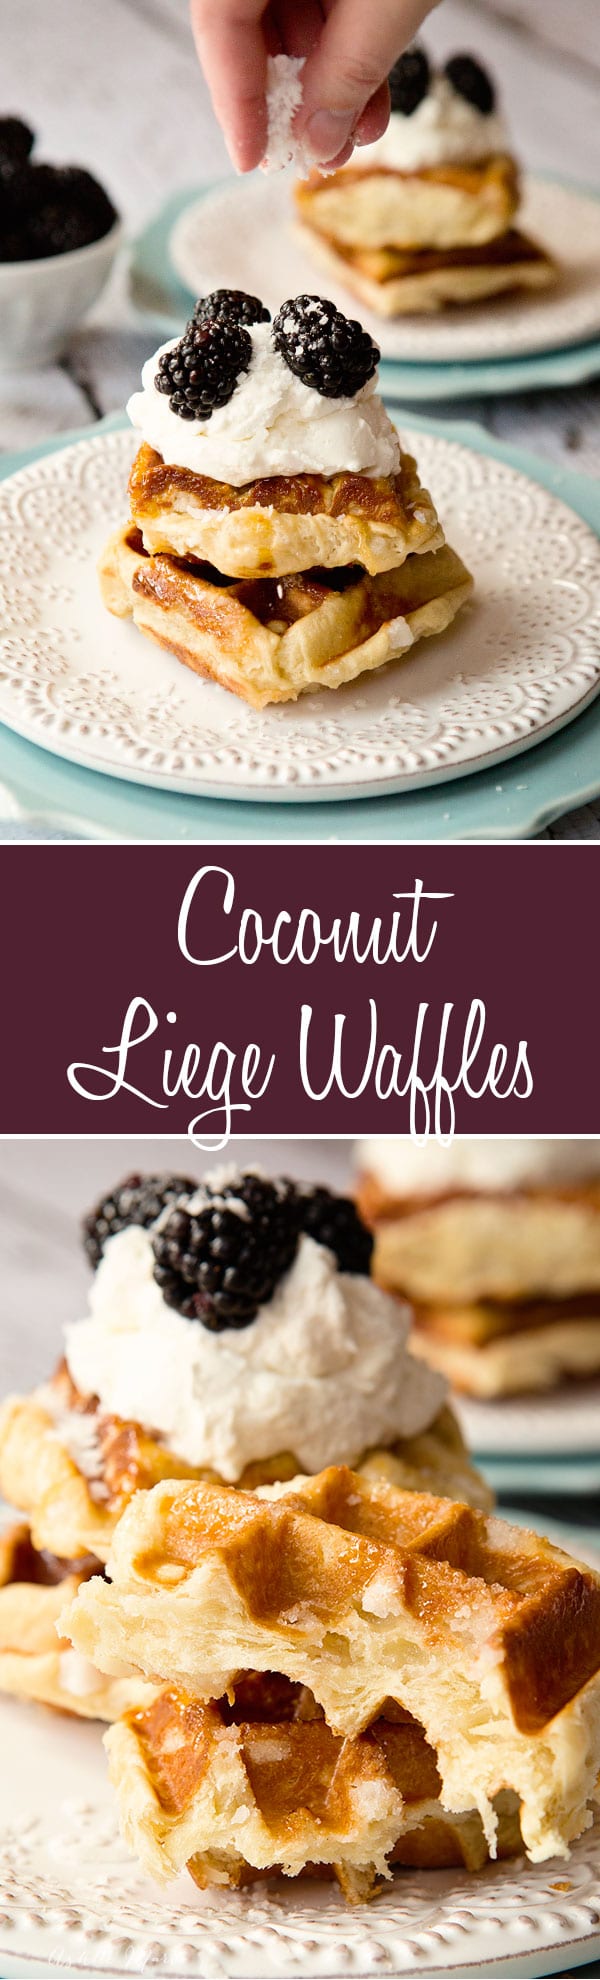 a twist on the tradition liege waffles by adding coconut milk and coconut. Serve with blackberries and fresh whipped cream